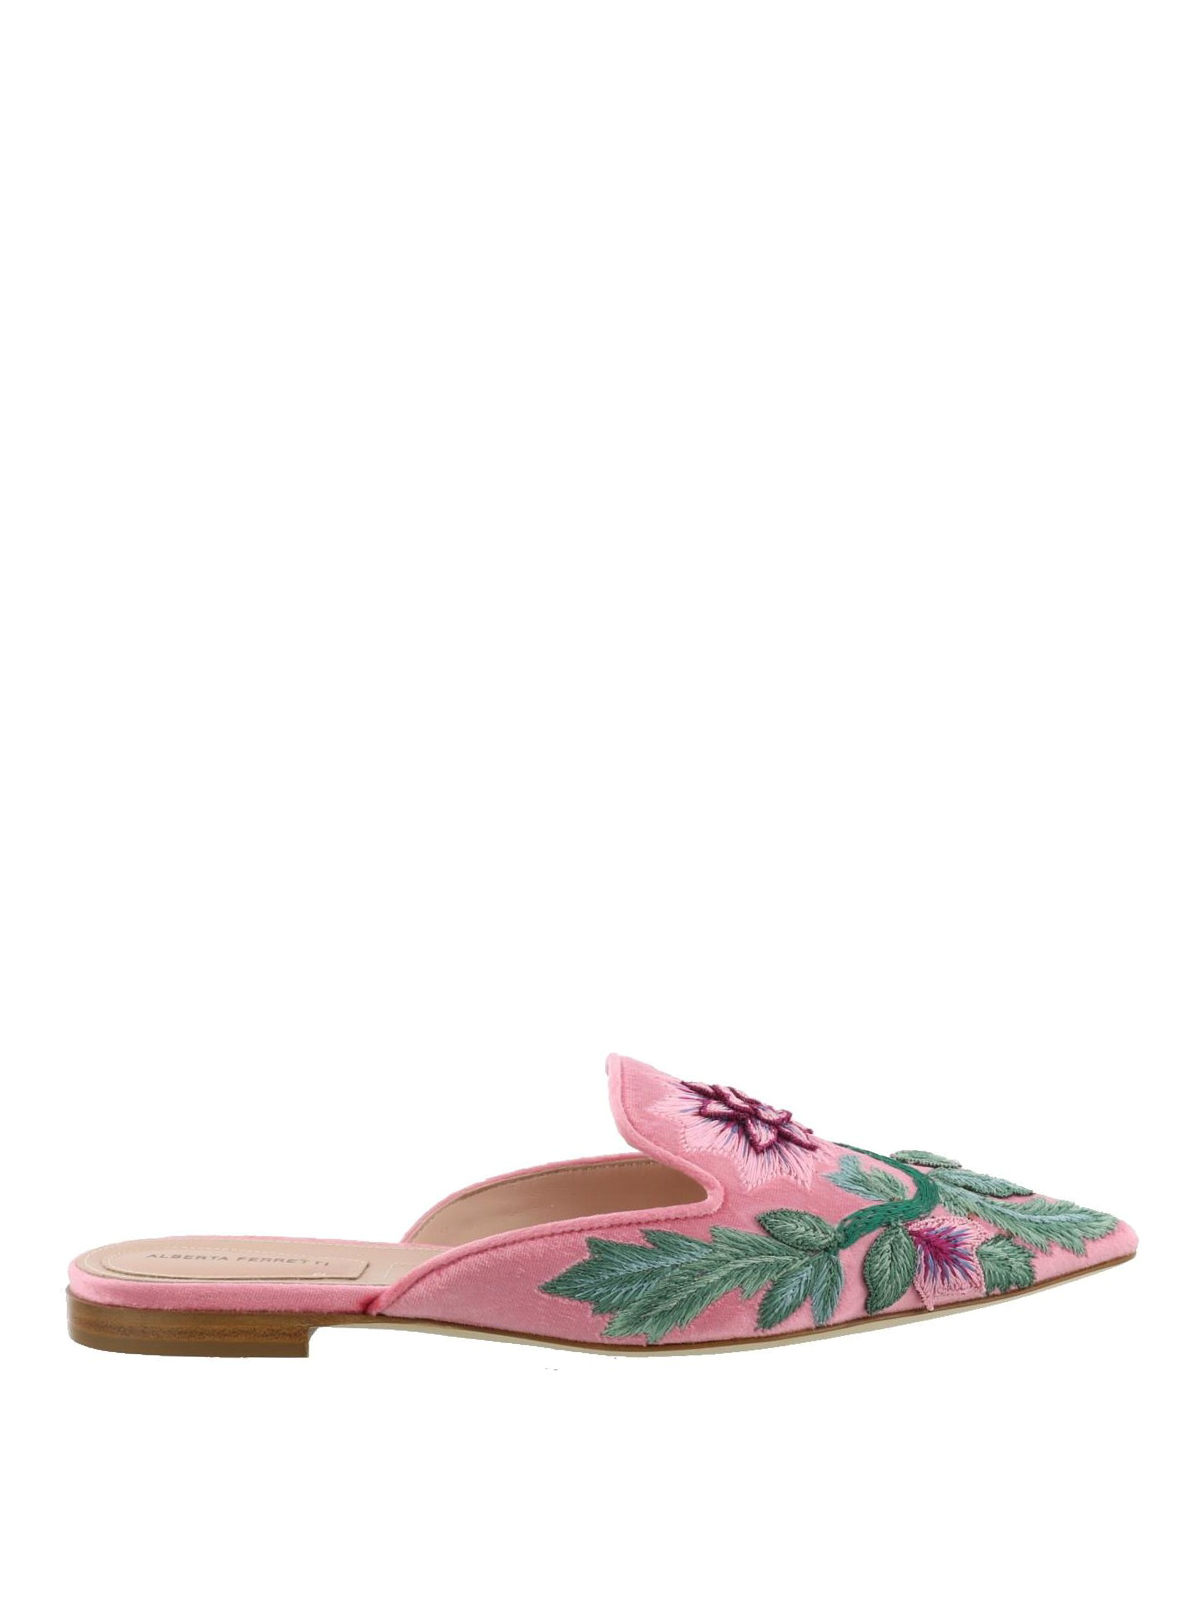 Mia embroidered pink velvet mules 